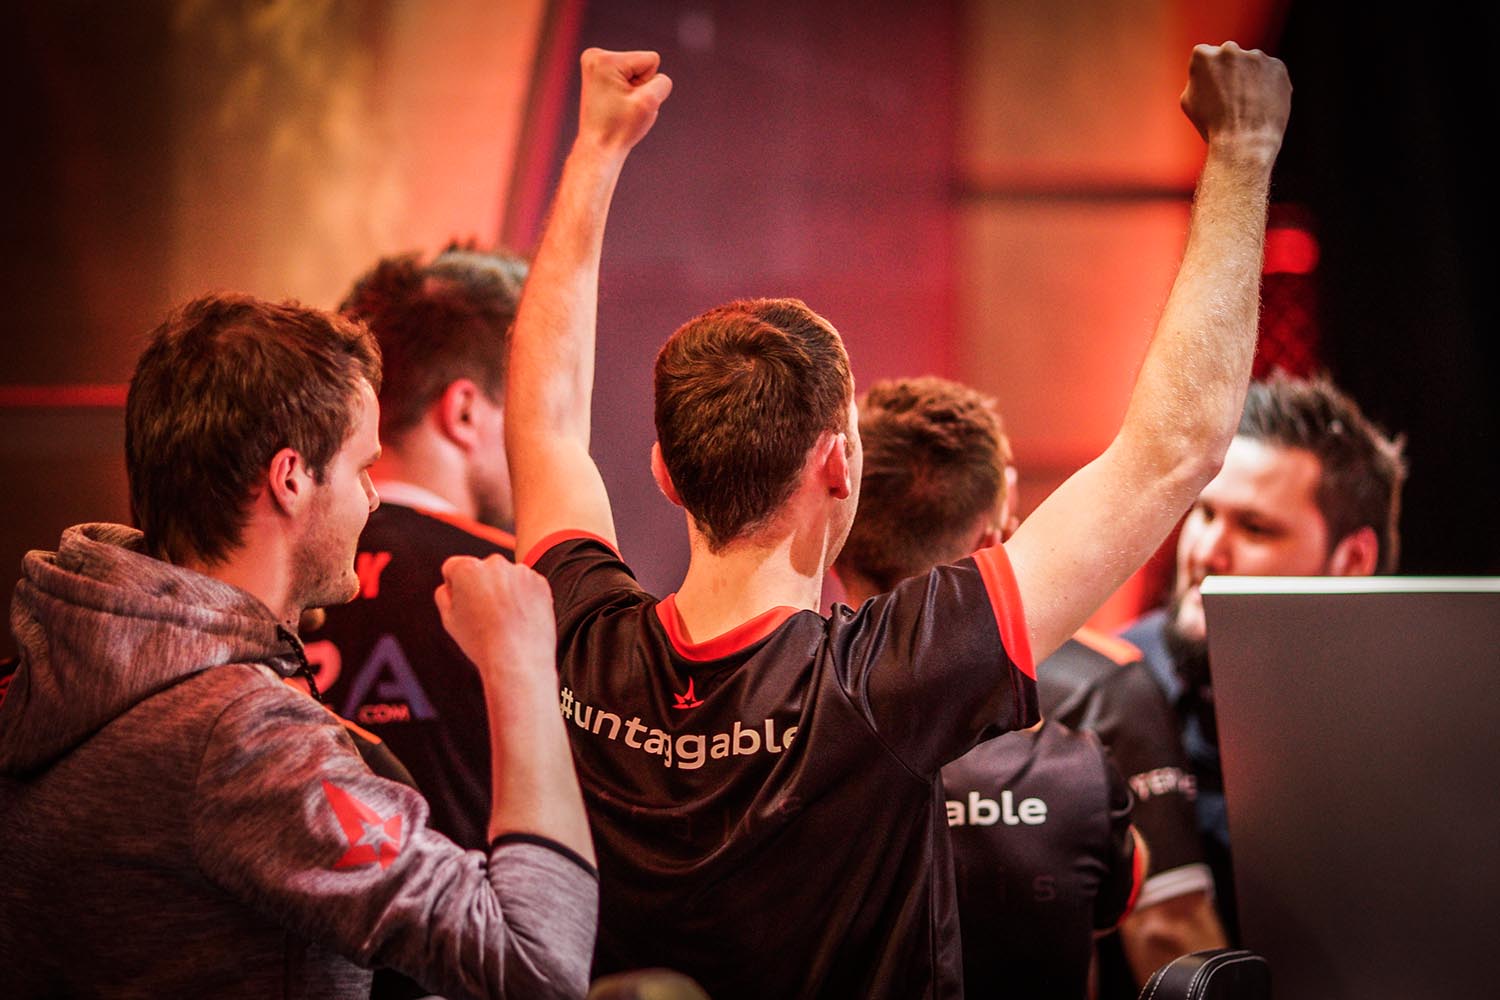 Astralis and Virtus Pro will battle for $250,000 in ELEAGUE showdown ...